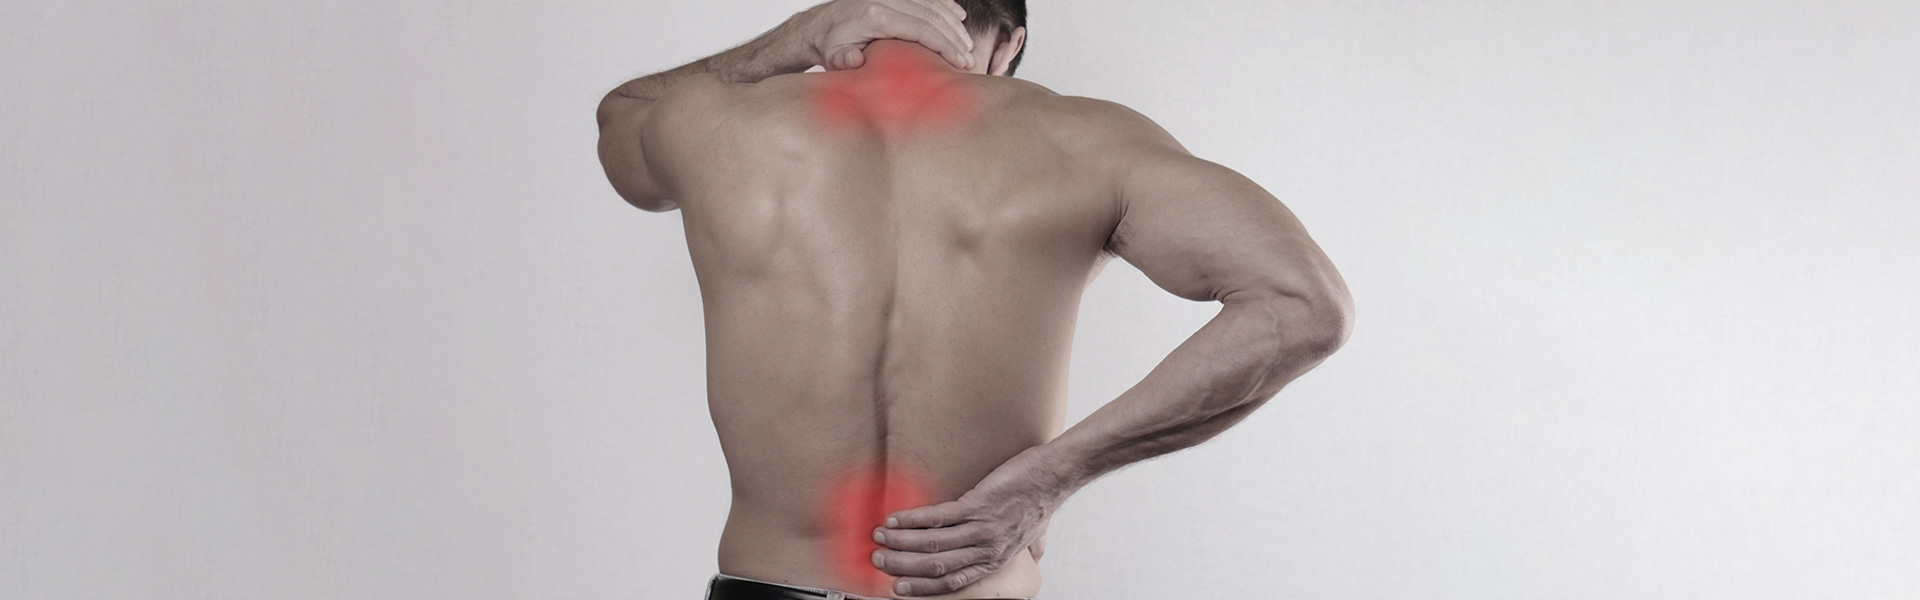 Getting The Best Low Back Pain Treatment For You